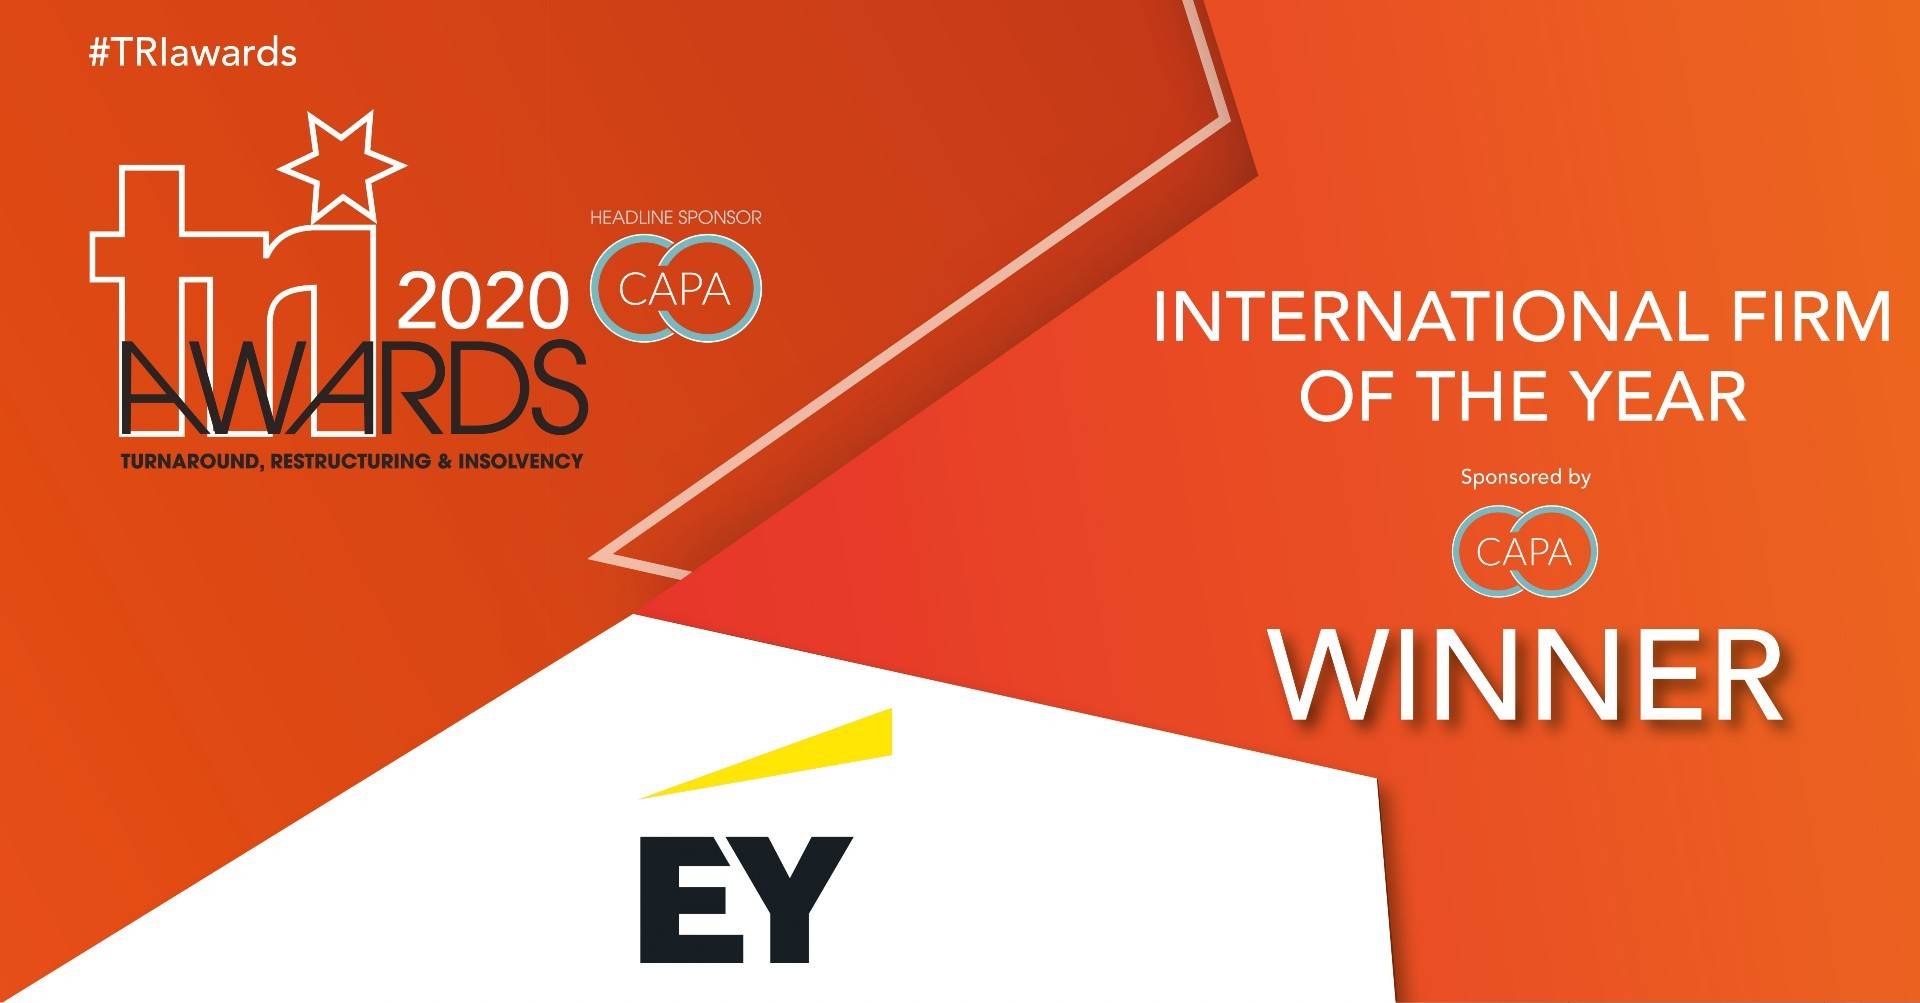 Image for 2020 TRI Awards - International Firm of the Year